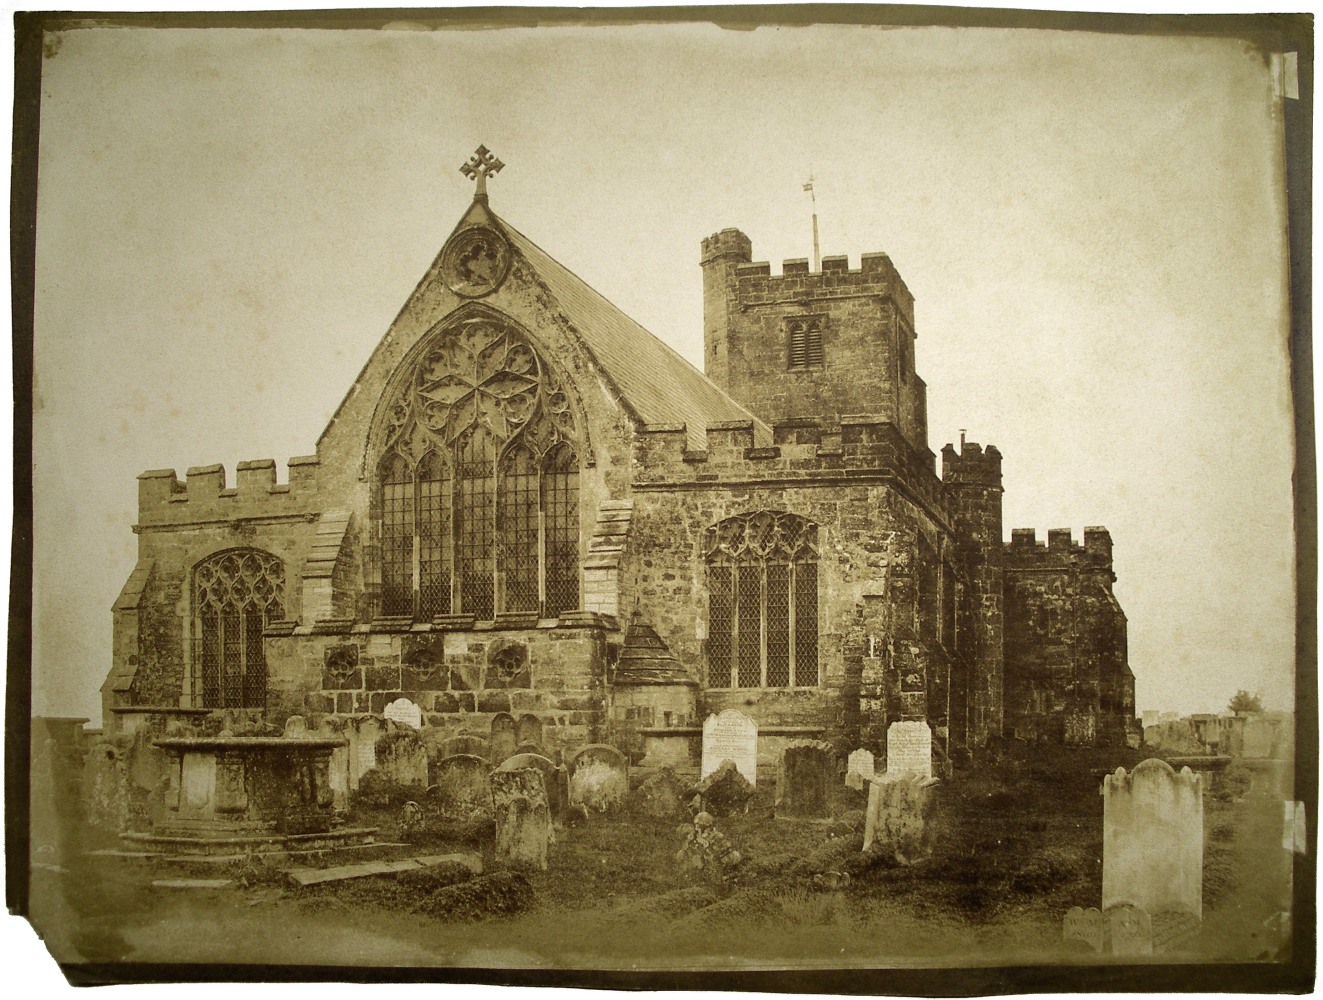 Benjamin Brecknell TURNER (English, 1815-1894) East End &quot;Hawkhurst Church&quot; Kent*, 1852-1854 Salt print from a waxed calotype negative 29.9 x 39.8 cm on 31.4 x 41.6 cm paper Titled &quot;Hawkhurst Church&quot; in pencil on verso